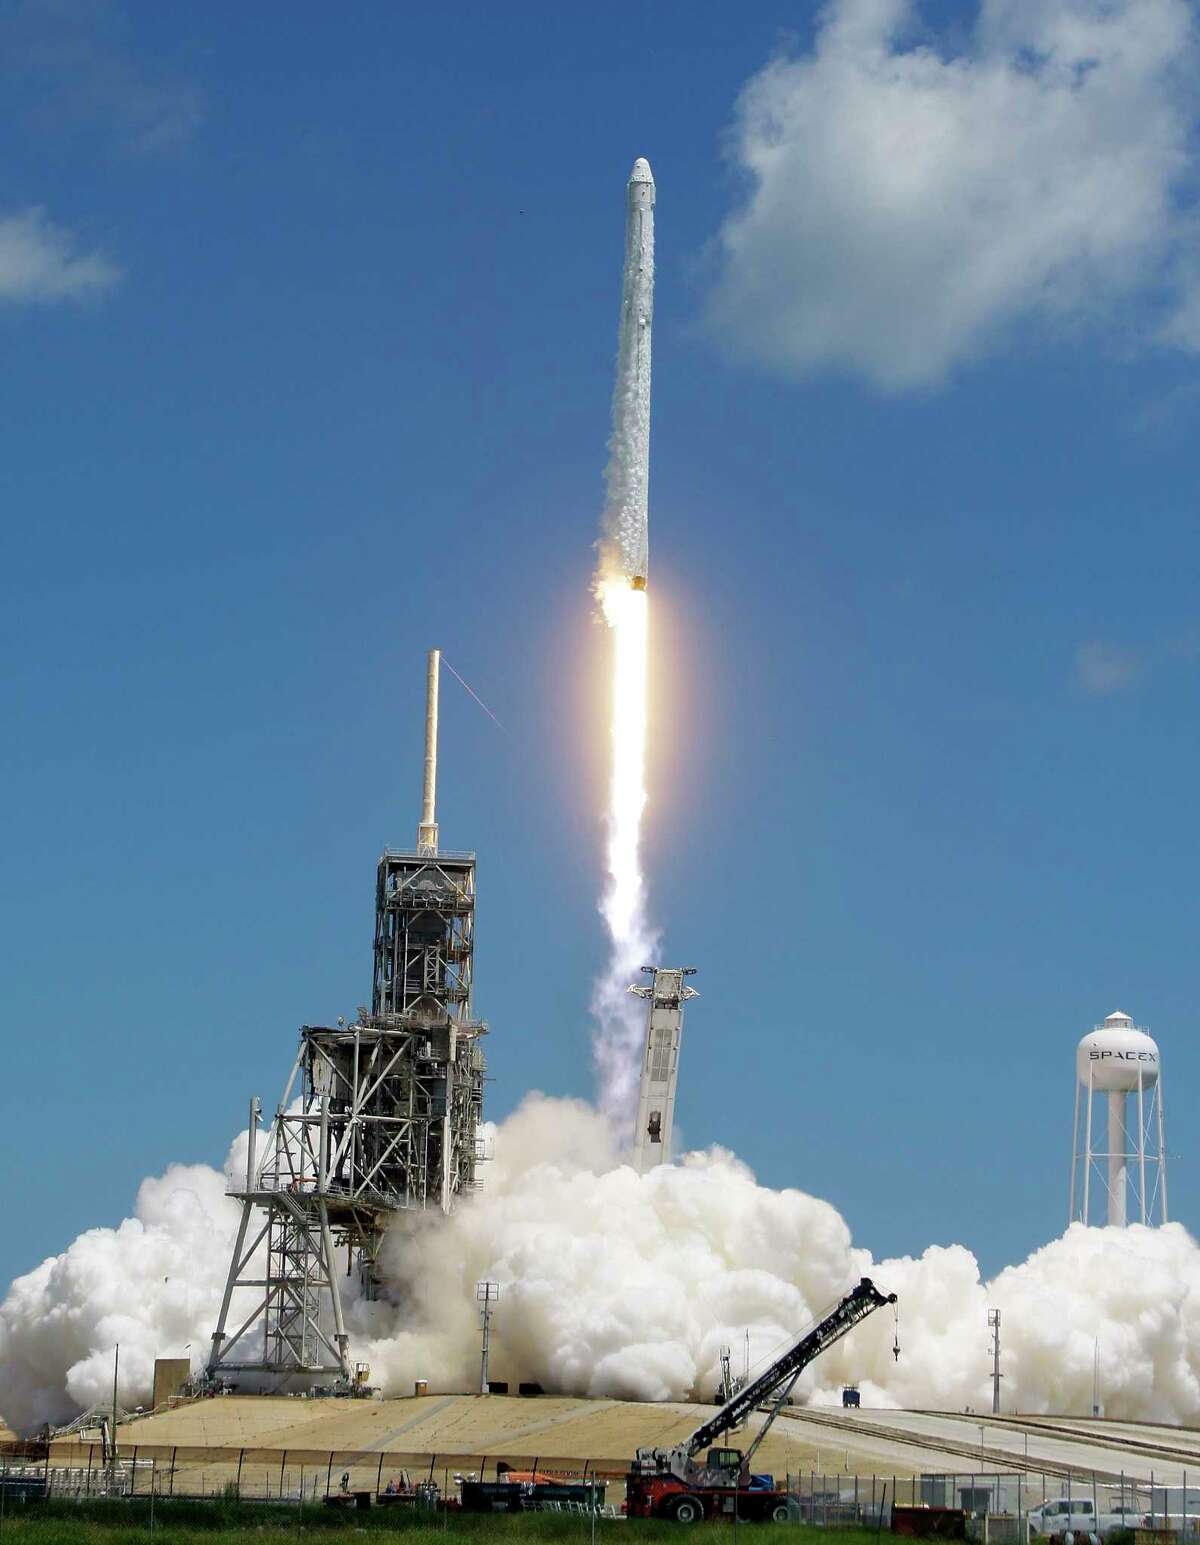 A Falcon 9 SpaceX rocket launches from Kennedy Space Center with 6,400 tons of cargo.